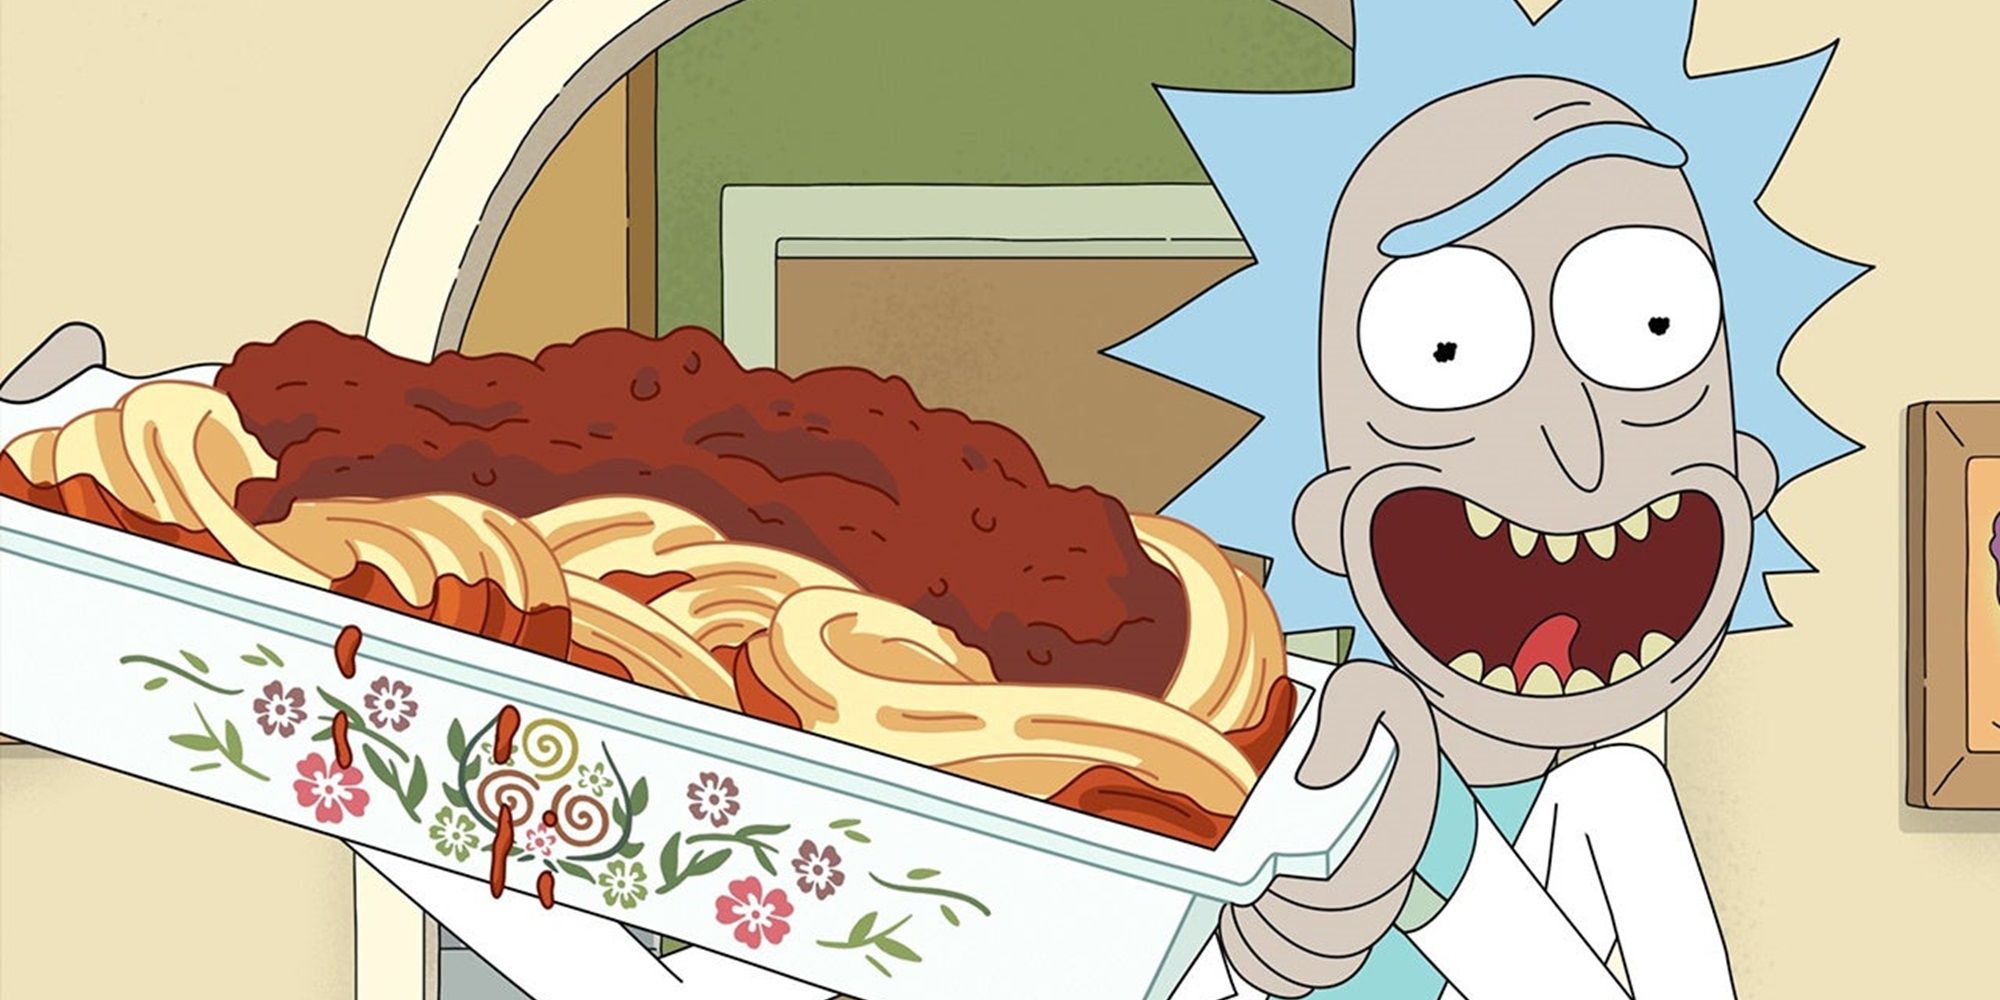 Rick holding a dish of spaghetti in Rick and Morty